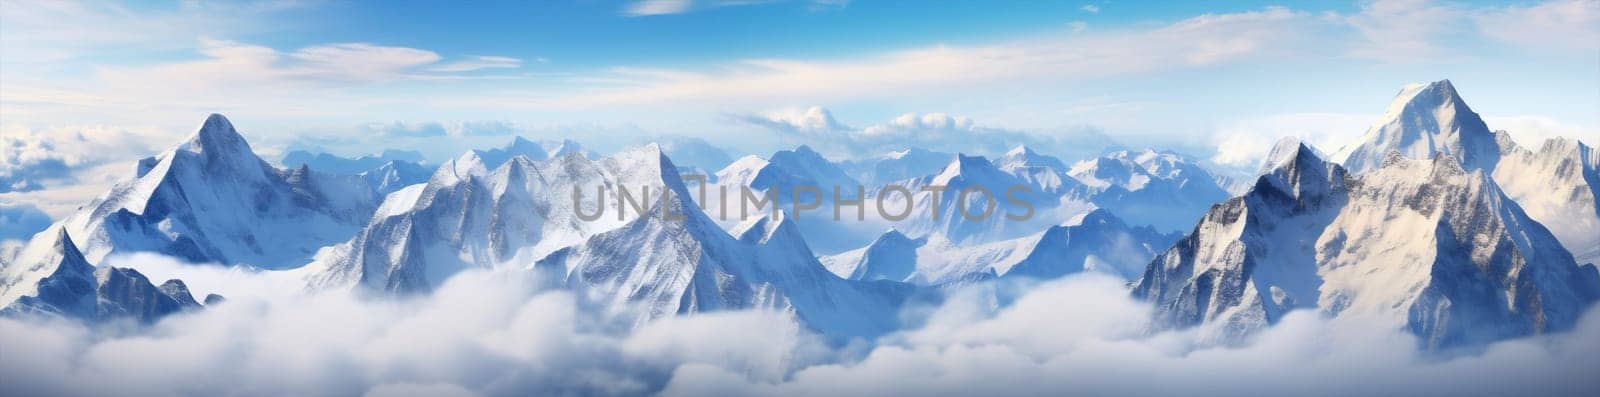 North snow water landscape nature mountain winter blue travel panorama island arctic by Vichizh